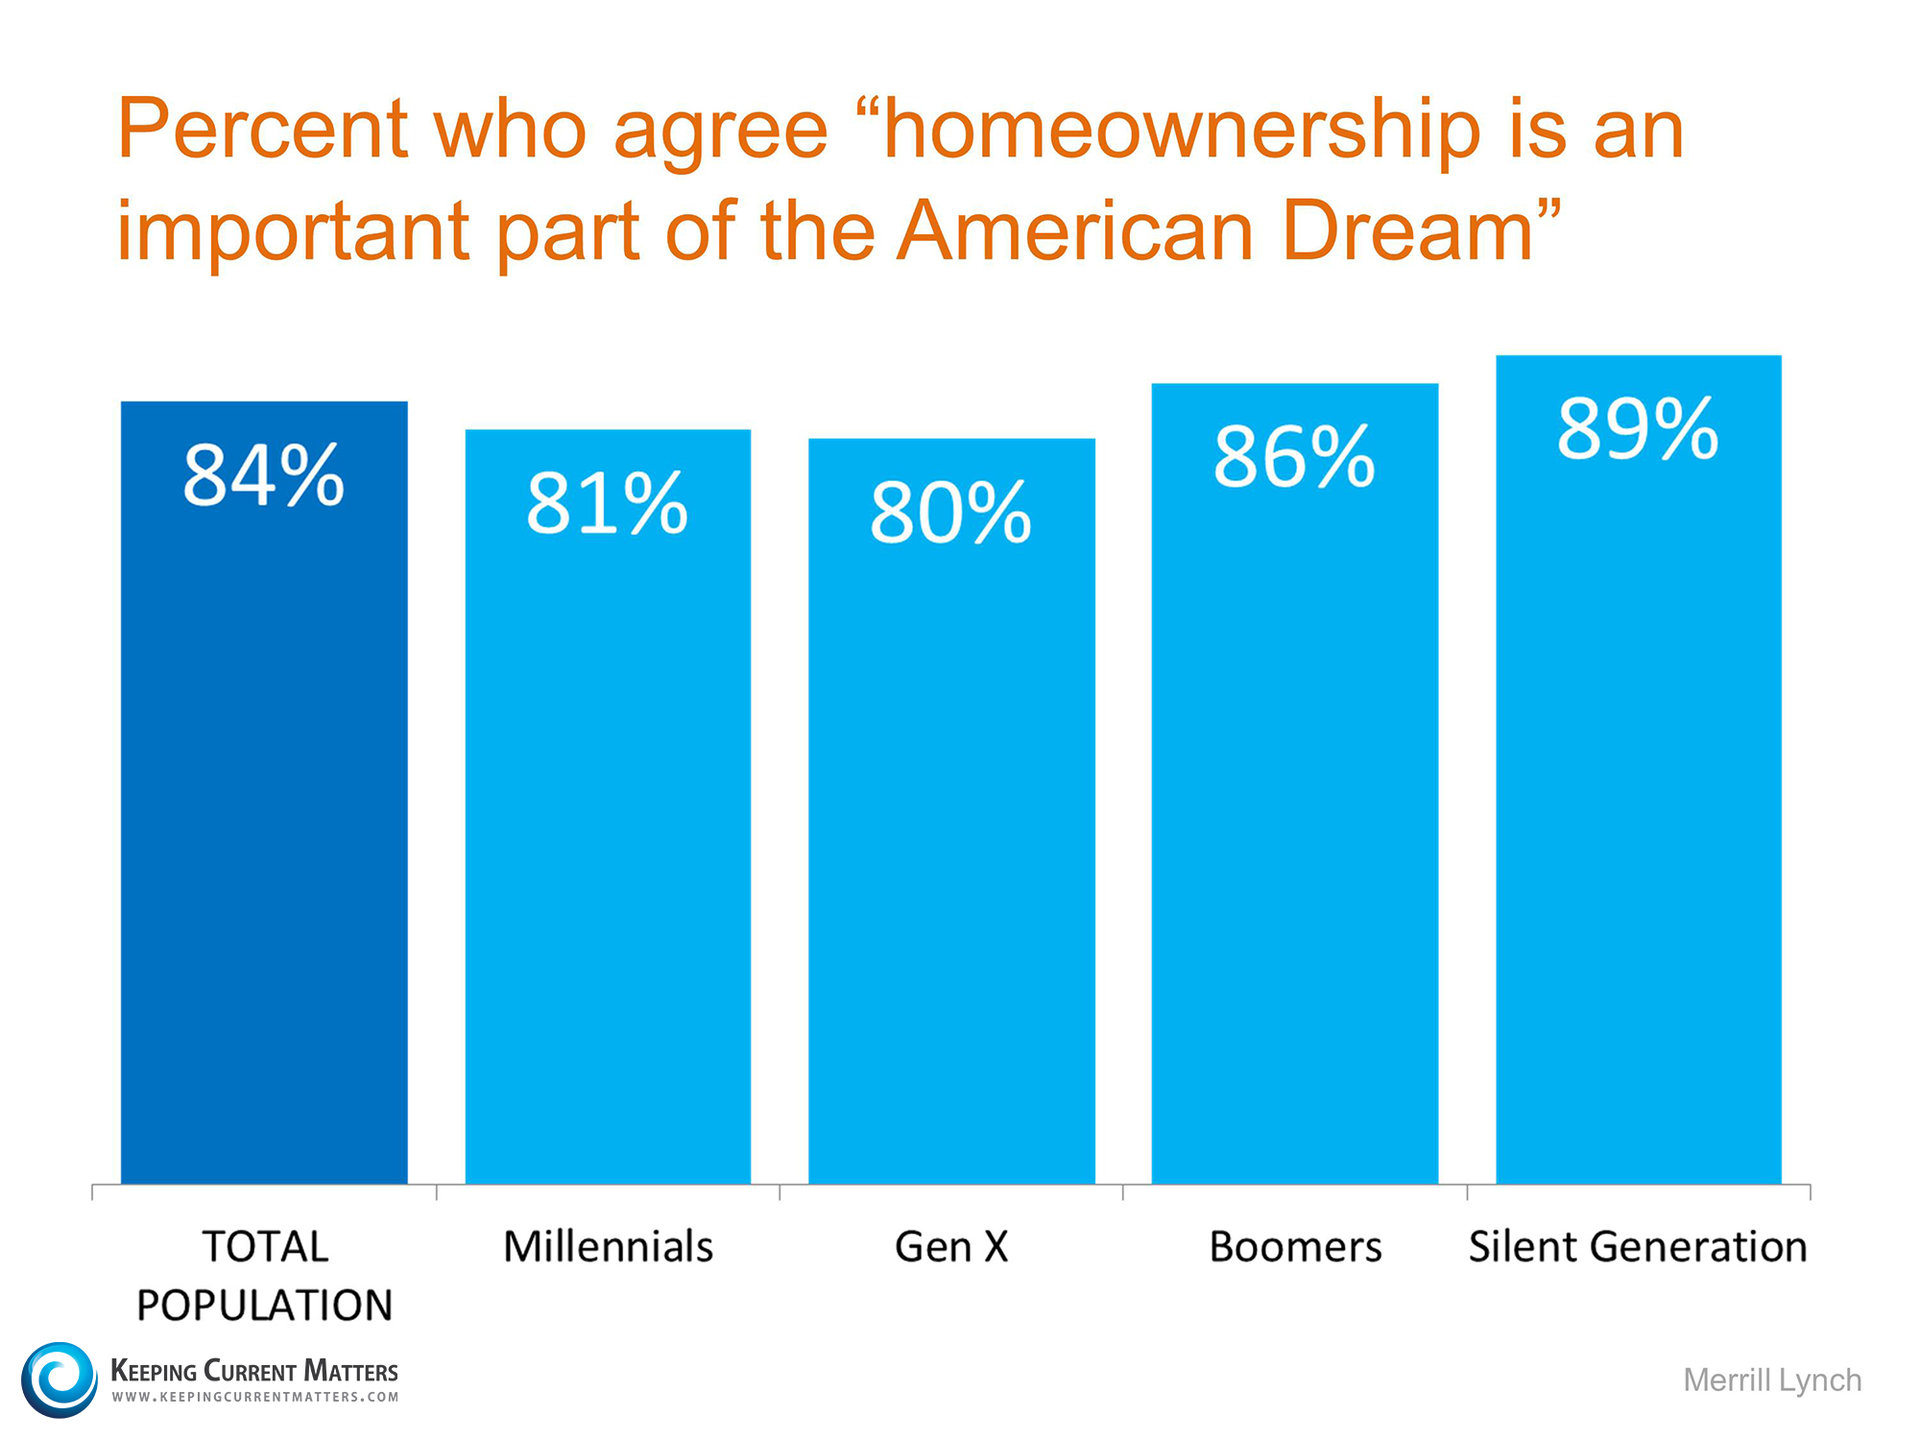 Homeownership is an important part of the American Dream | Keeping Current Matters